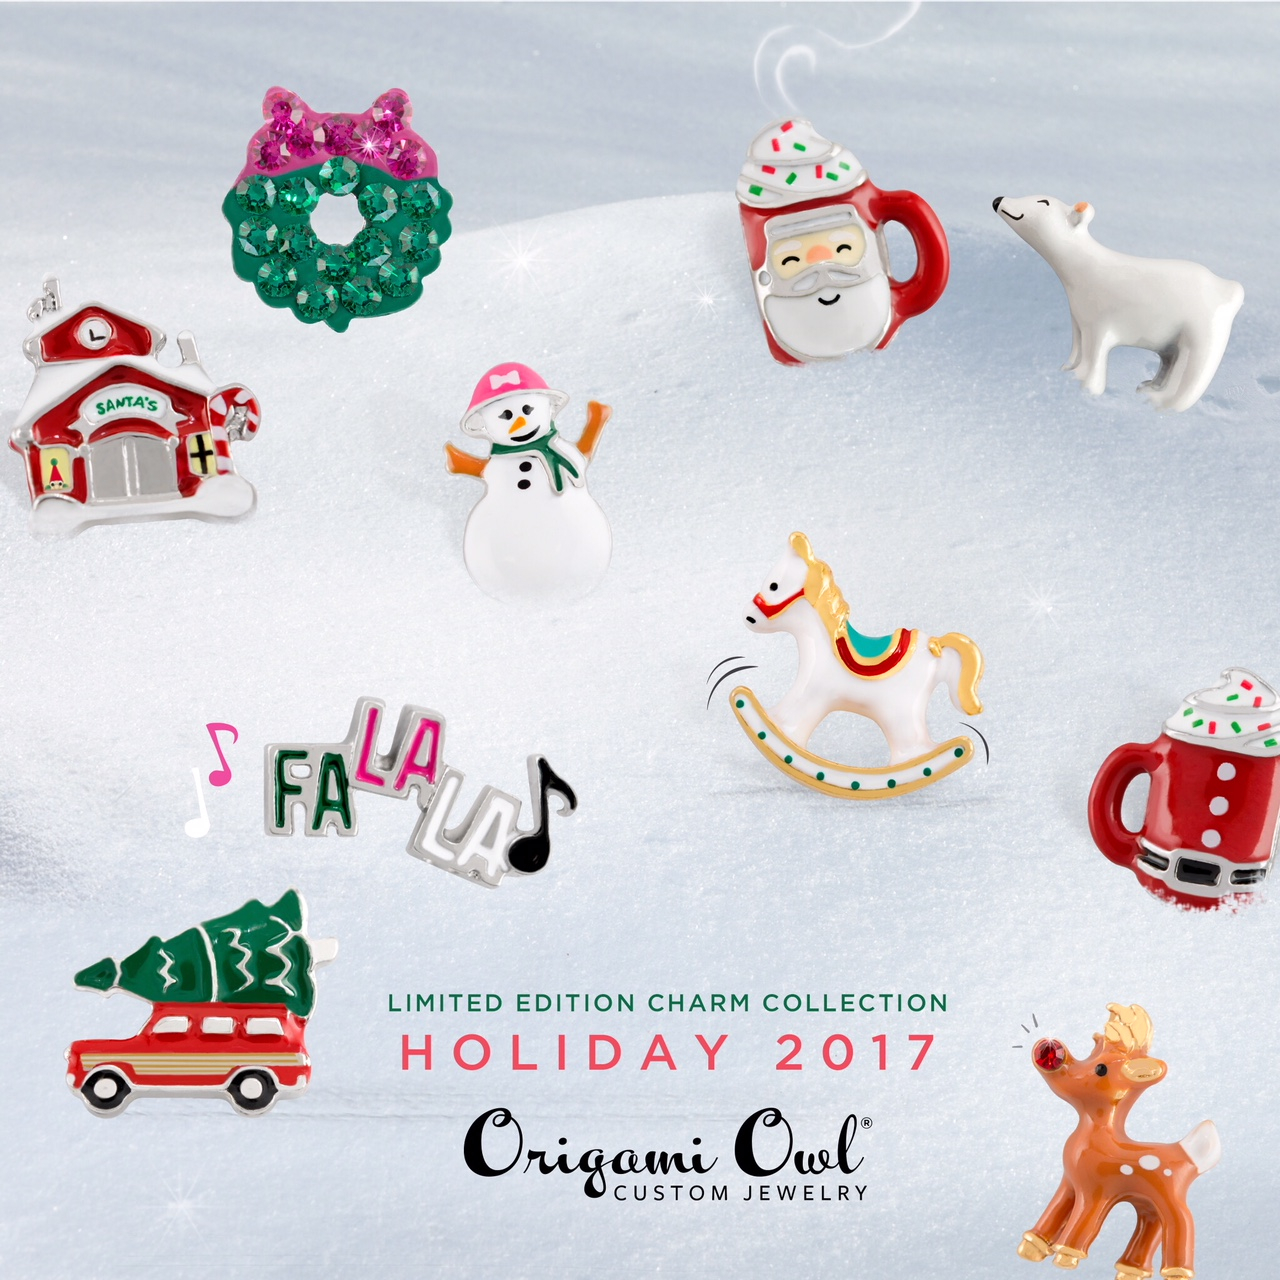 Cheap Origami Owl Charms Origami Owl Holiday Collection 2017 Give The Gift Of Sparkle